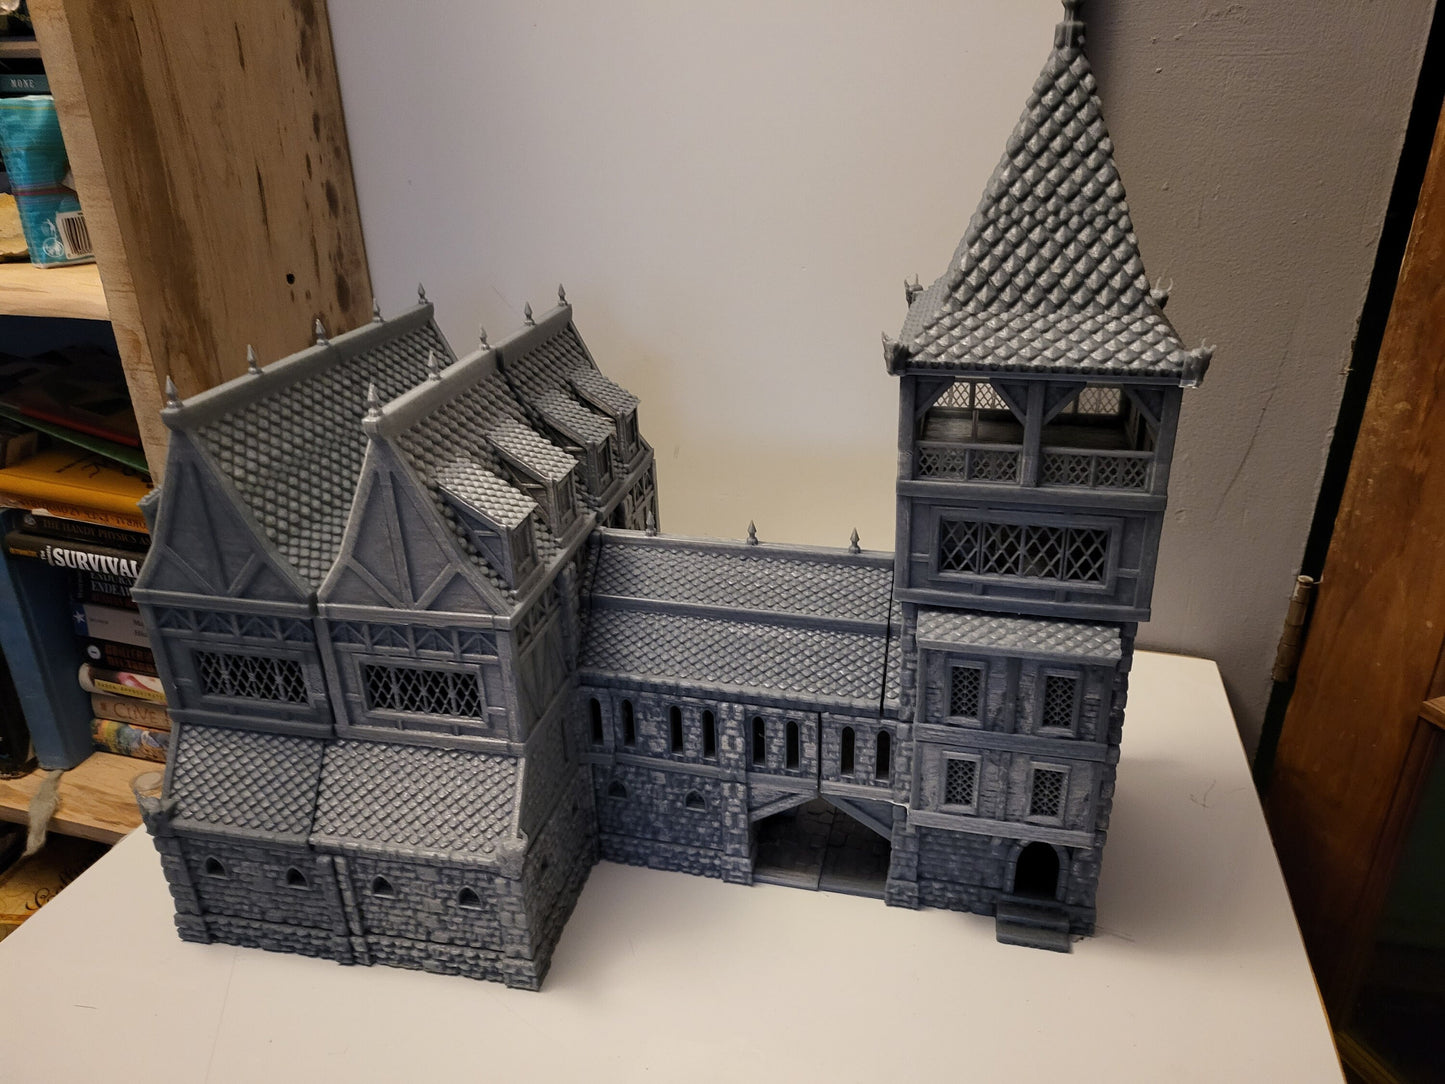 Manor, estate, noble house, Noble estate, Stonewall Castle, Warhammer Terrain, Dungeons and Dragons, Warhammer, Terrain, Gaming Fortress, DND Fort, Fantasy Castle, Defensive Castle, Dark Palace